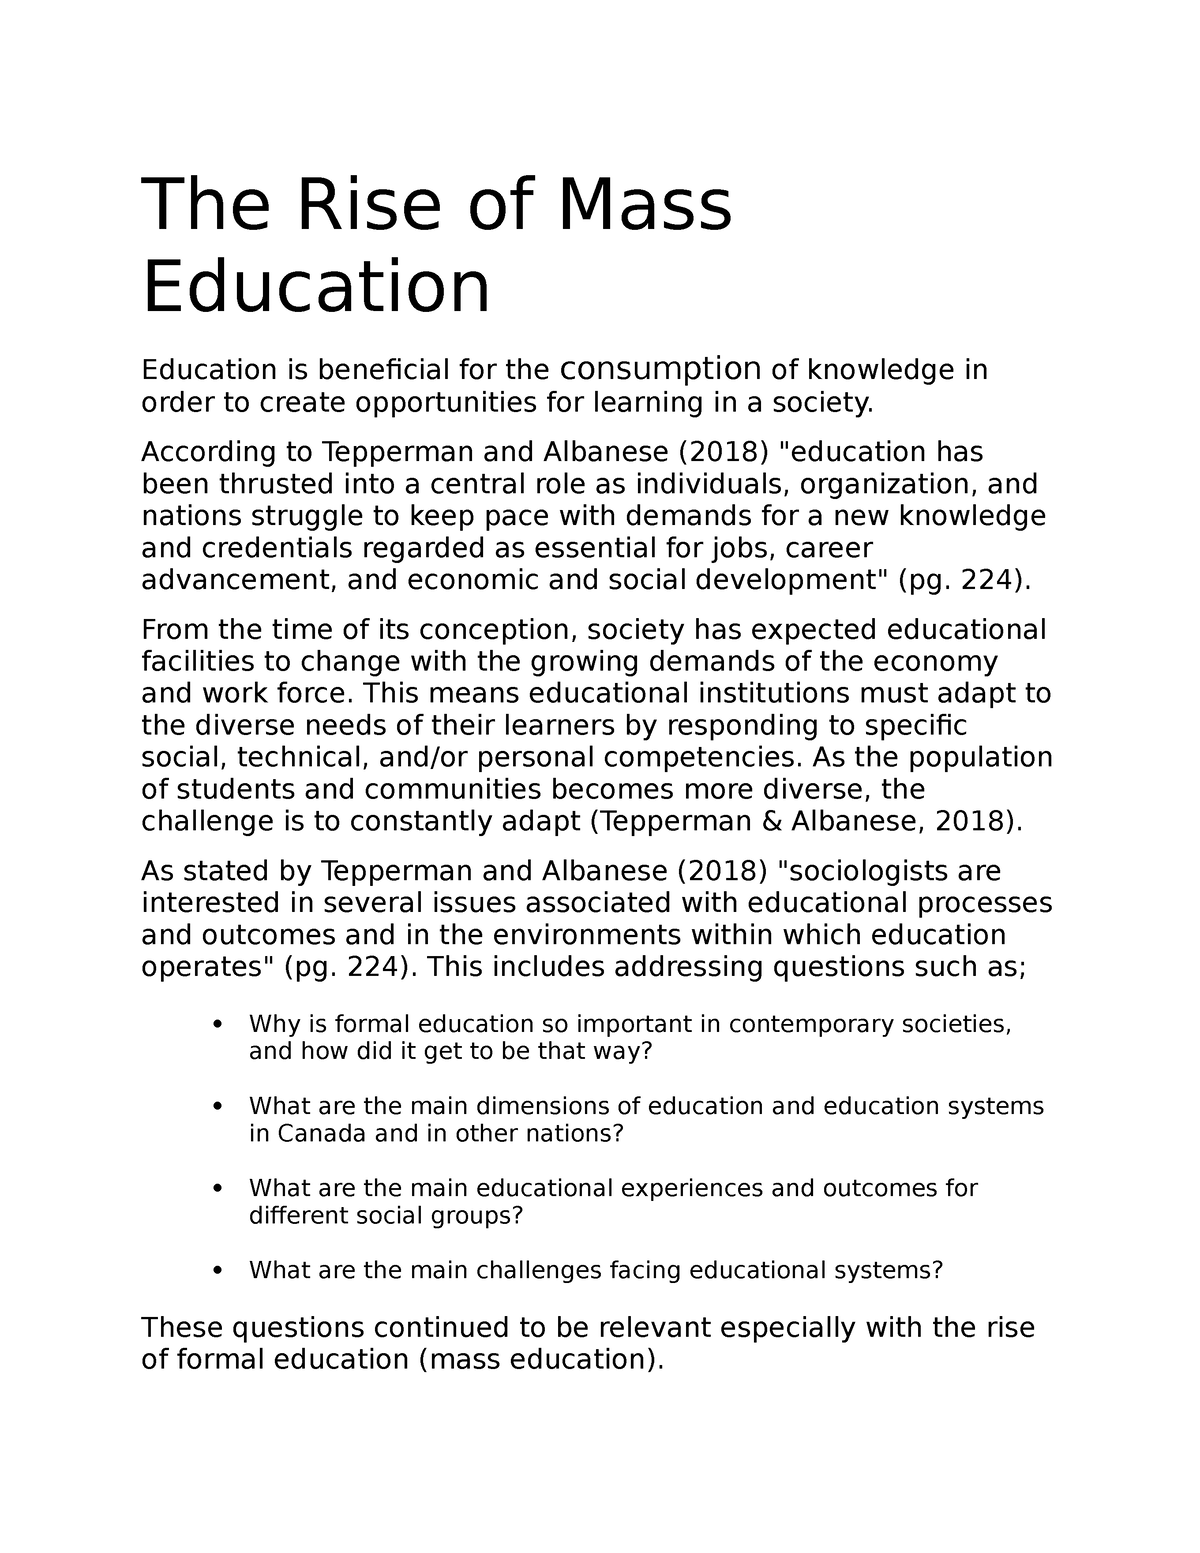 short note on mass education